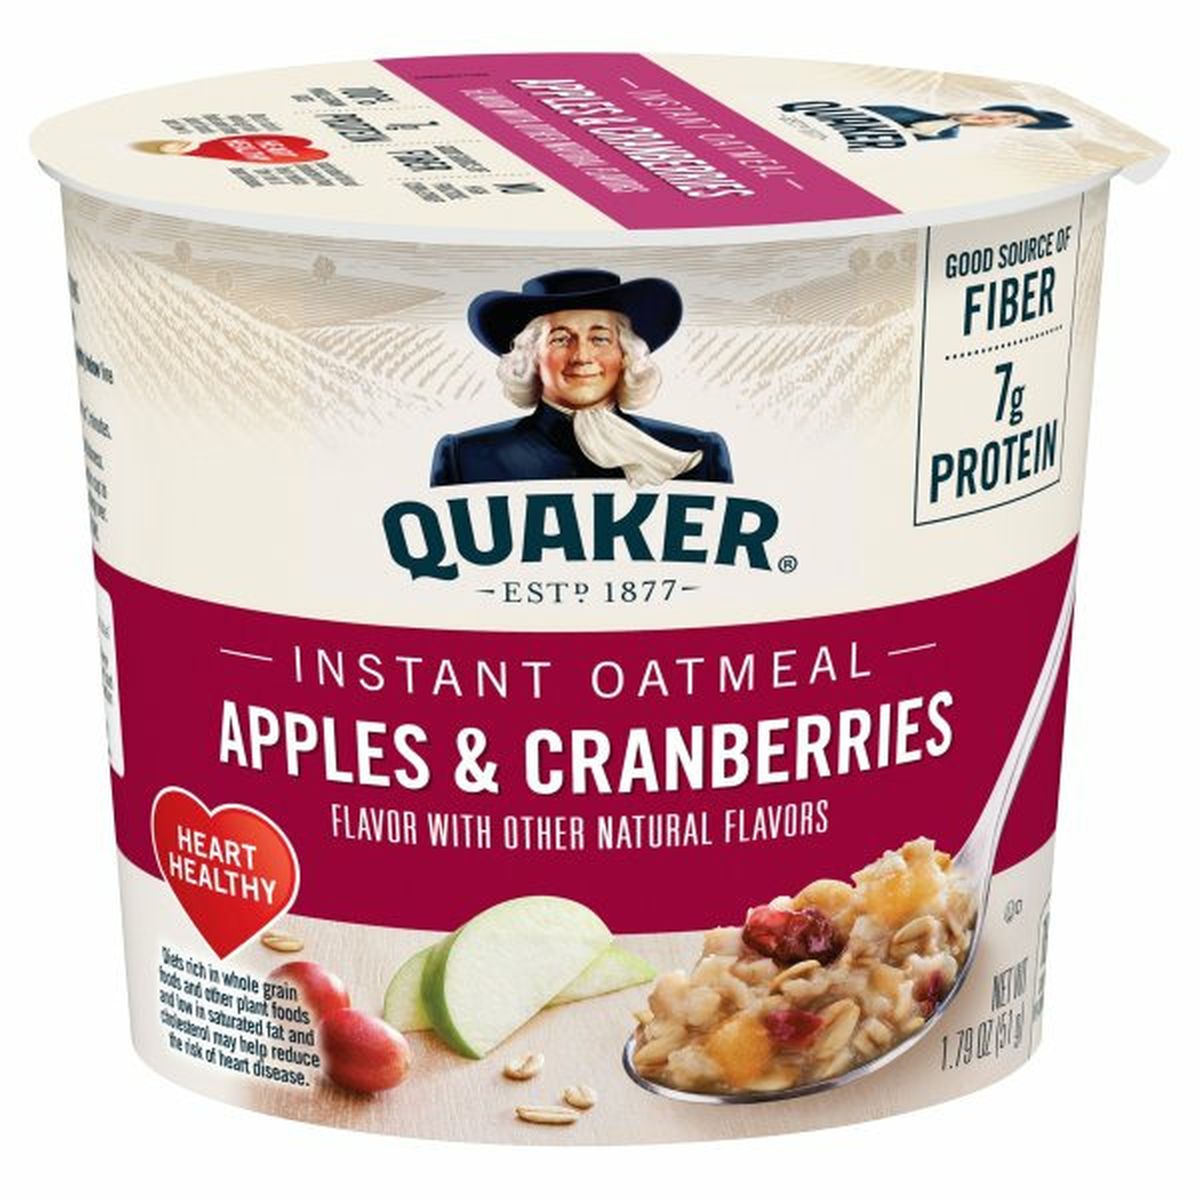 Calories in Quaker Instant Oatmeal Instant Oats Hot Cereal, Apple Cranberry